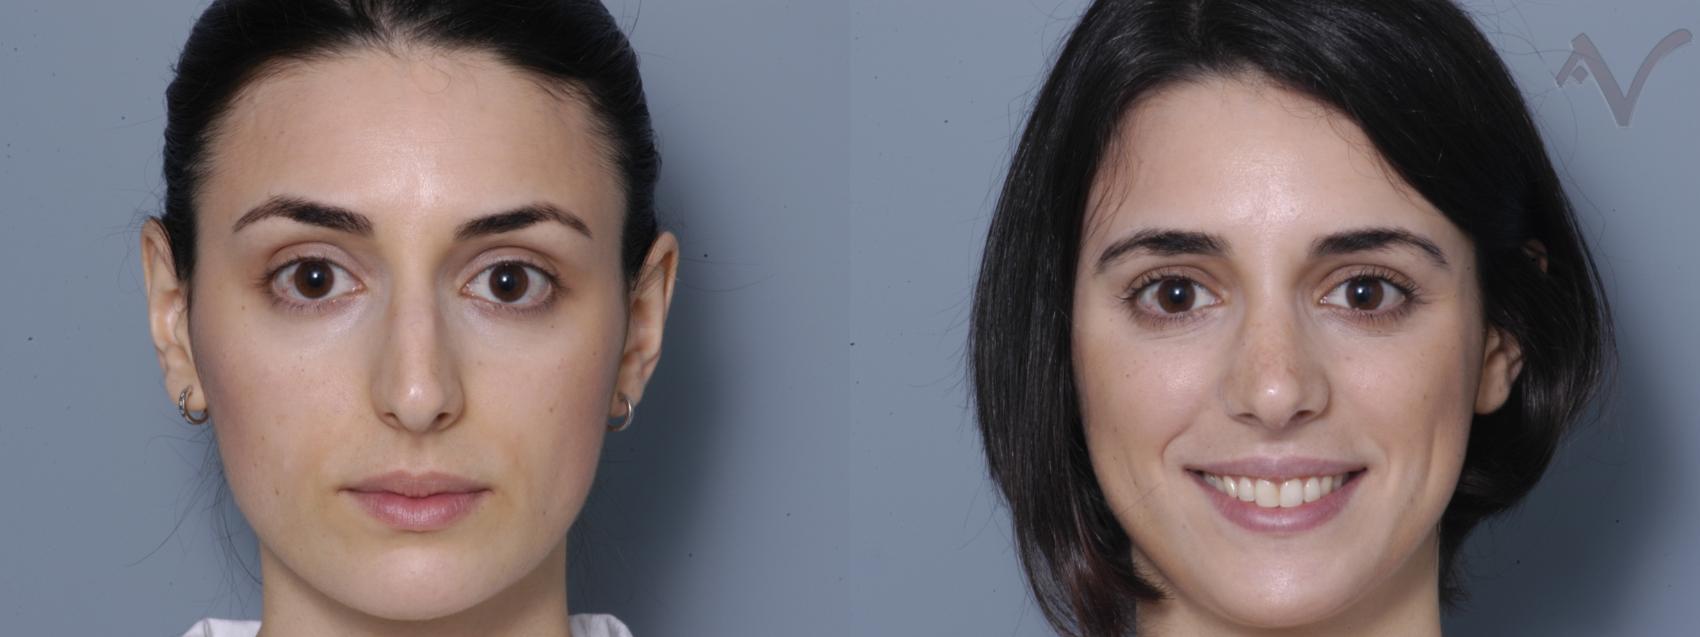 Before & After Rhinoplasty Case 1 Front View in Los Angeles, CA